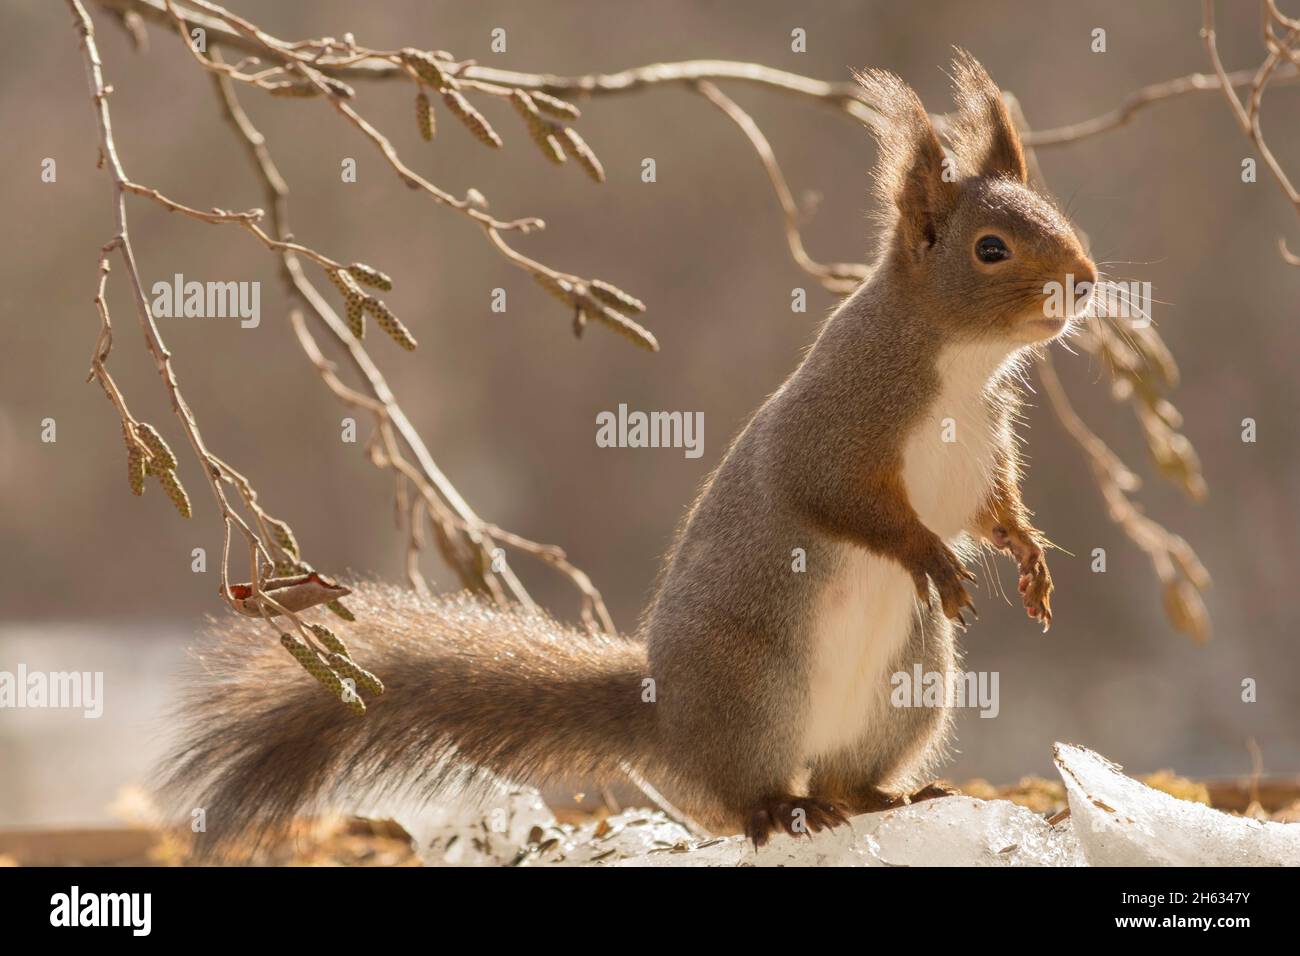 close up of red squirrel standing on snow with tree branches and sunlight behind Stock Photo